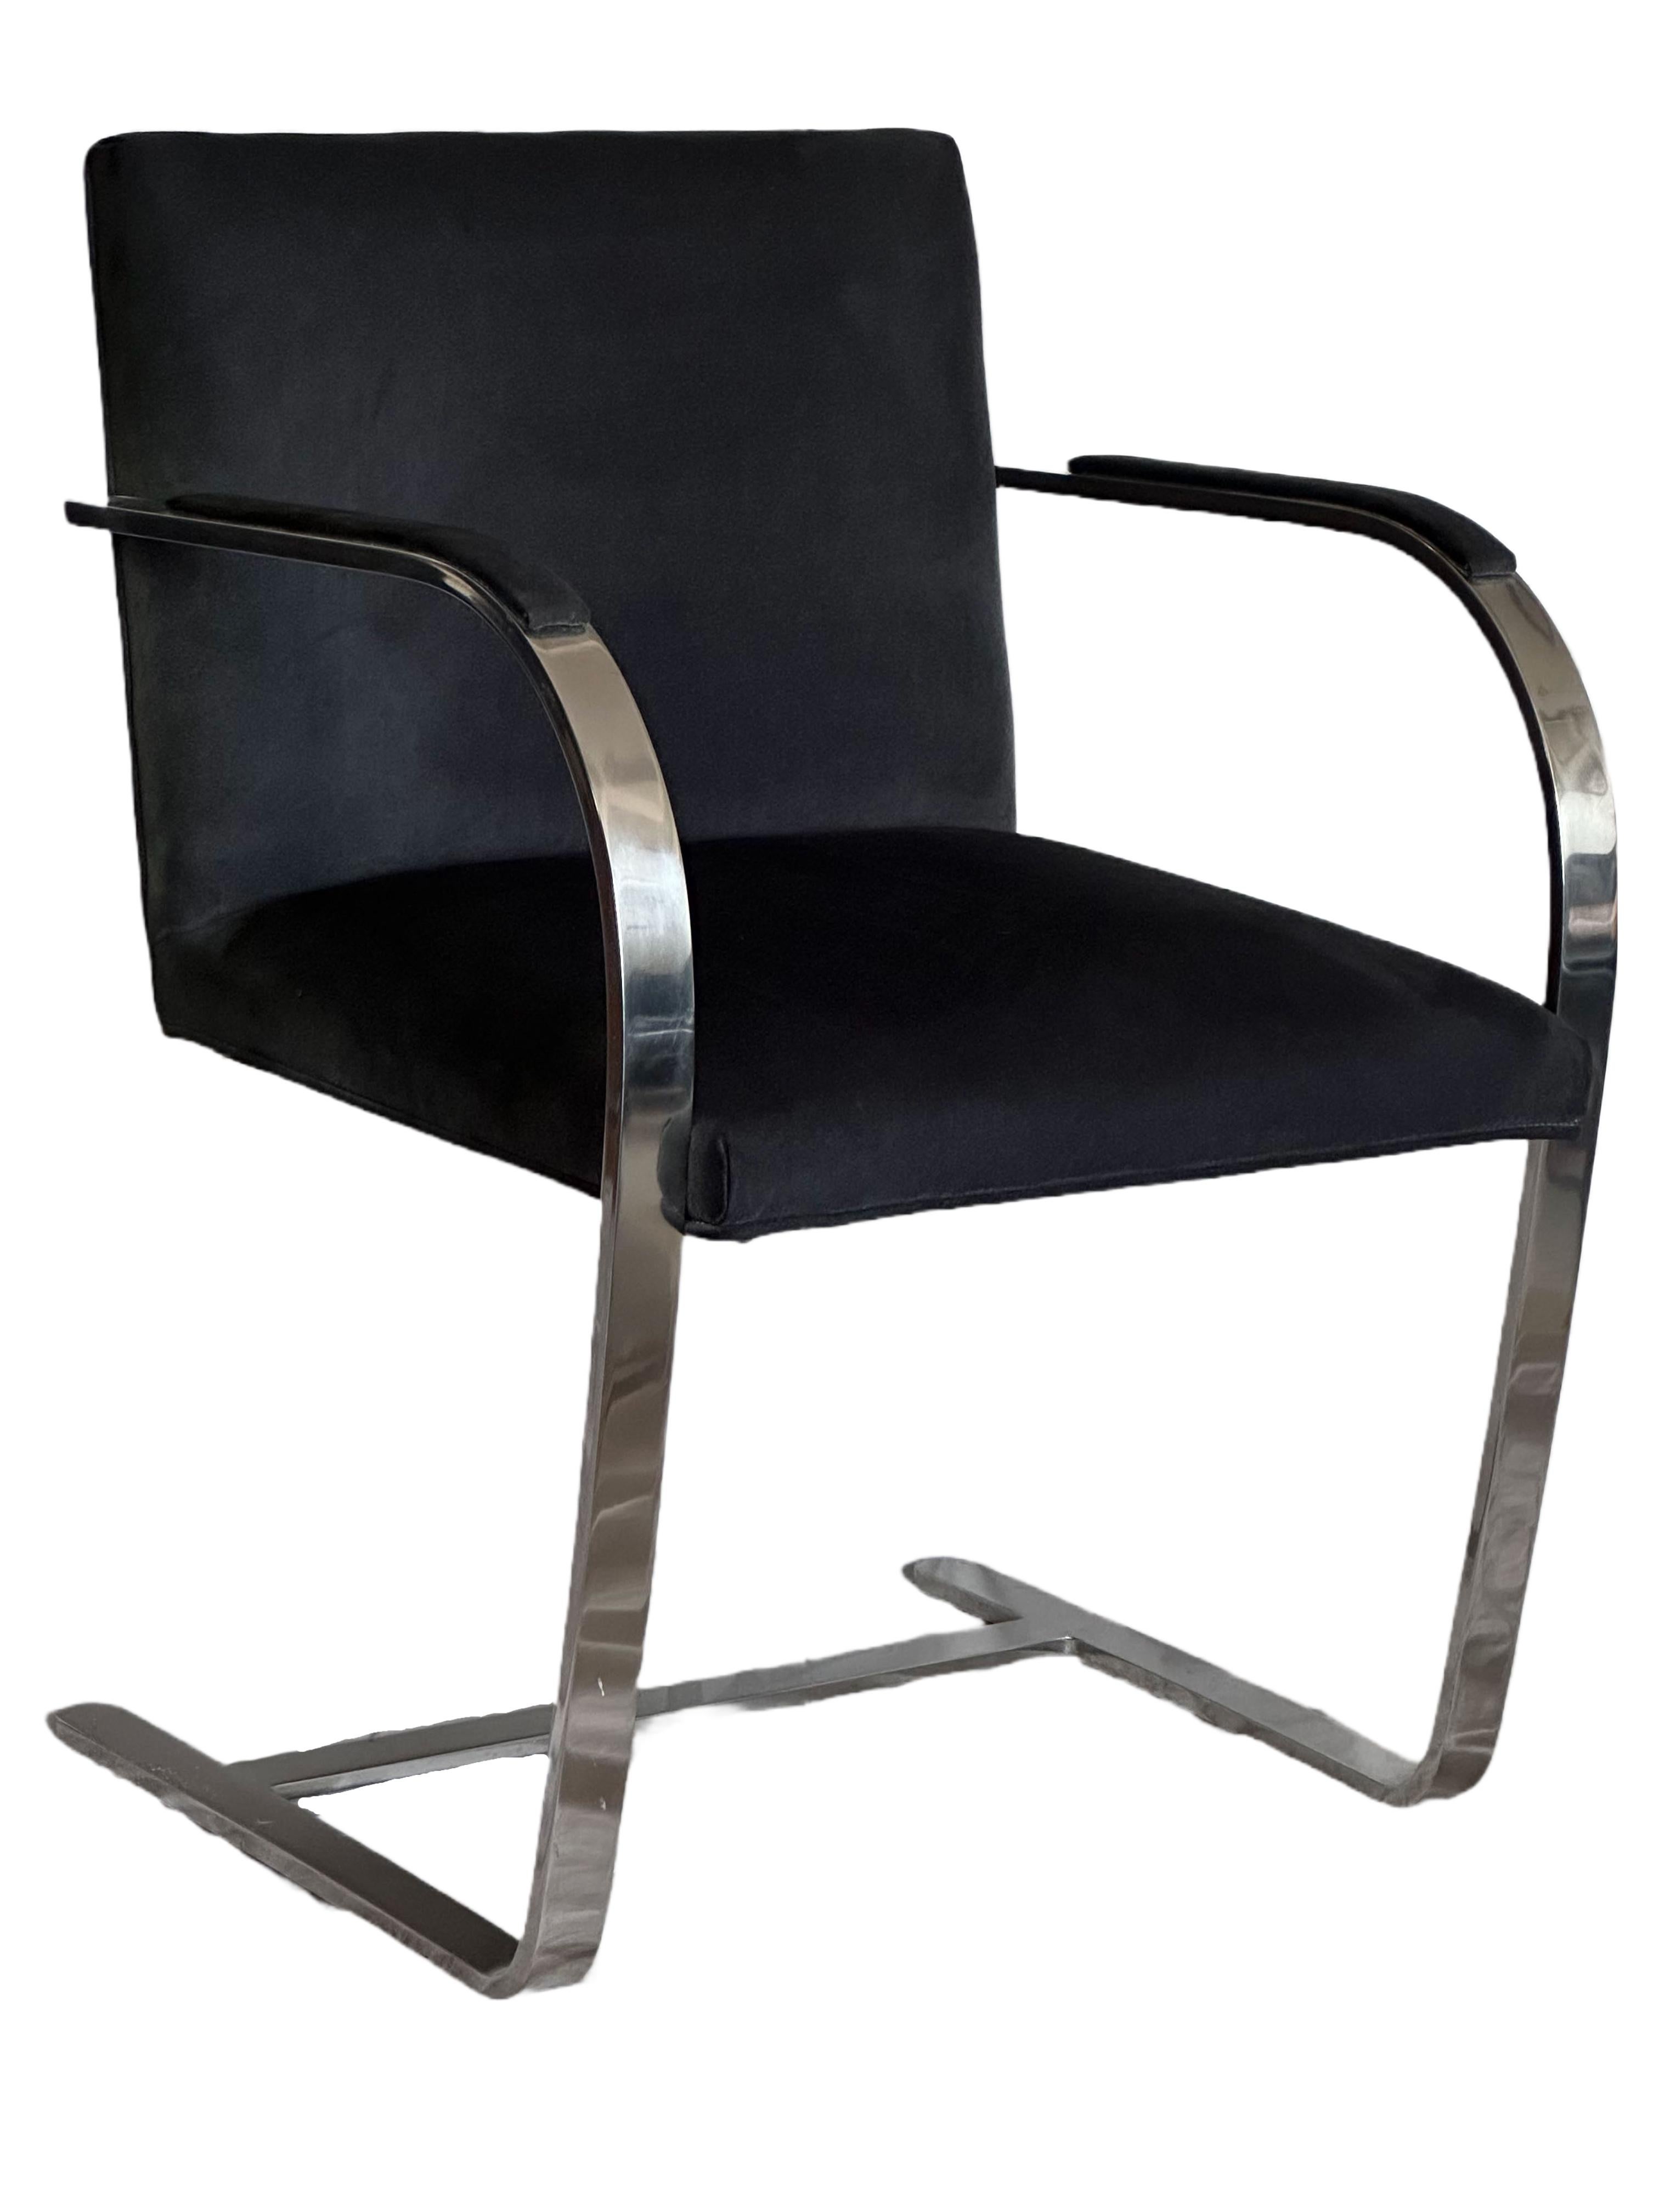 These are a vintage pair of the iconic BRNO chair (model 255) designed by Mies van der Rohe for Knoll.

The flat bar frame is polished chrome (plated), and the seat is black suede form the period. The chairs are barely used and in excellent